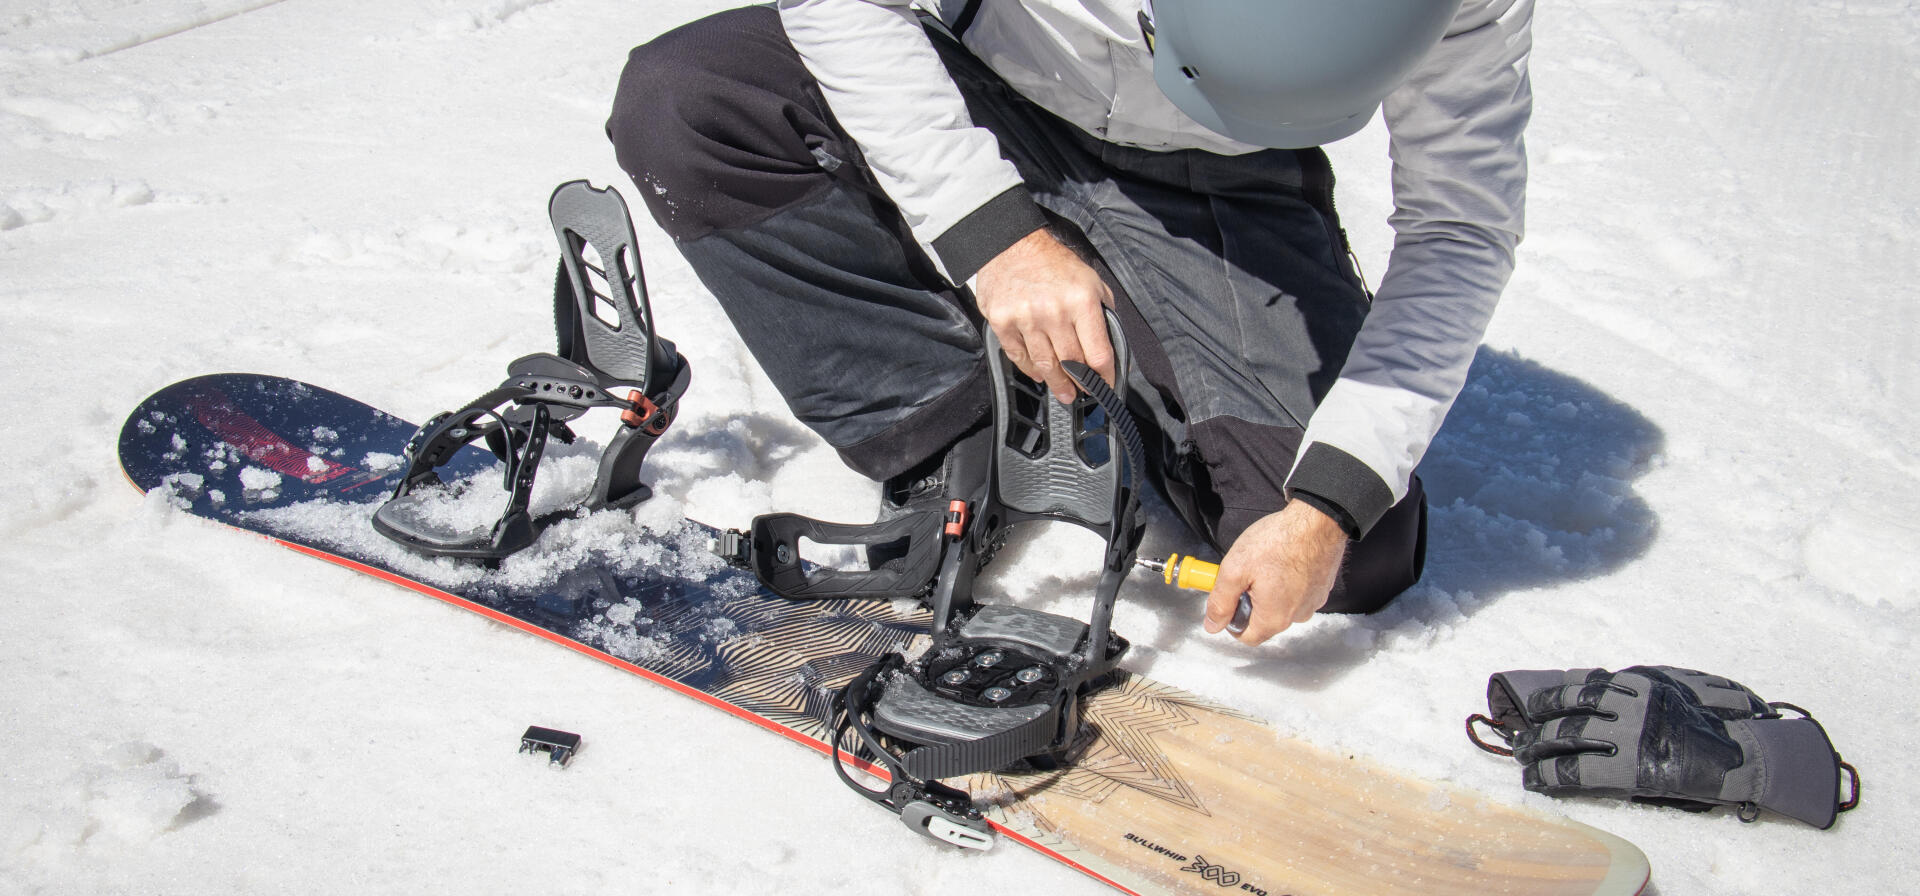 A Guide to Burton Binding Adjustments and Easy At-Home Repairs